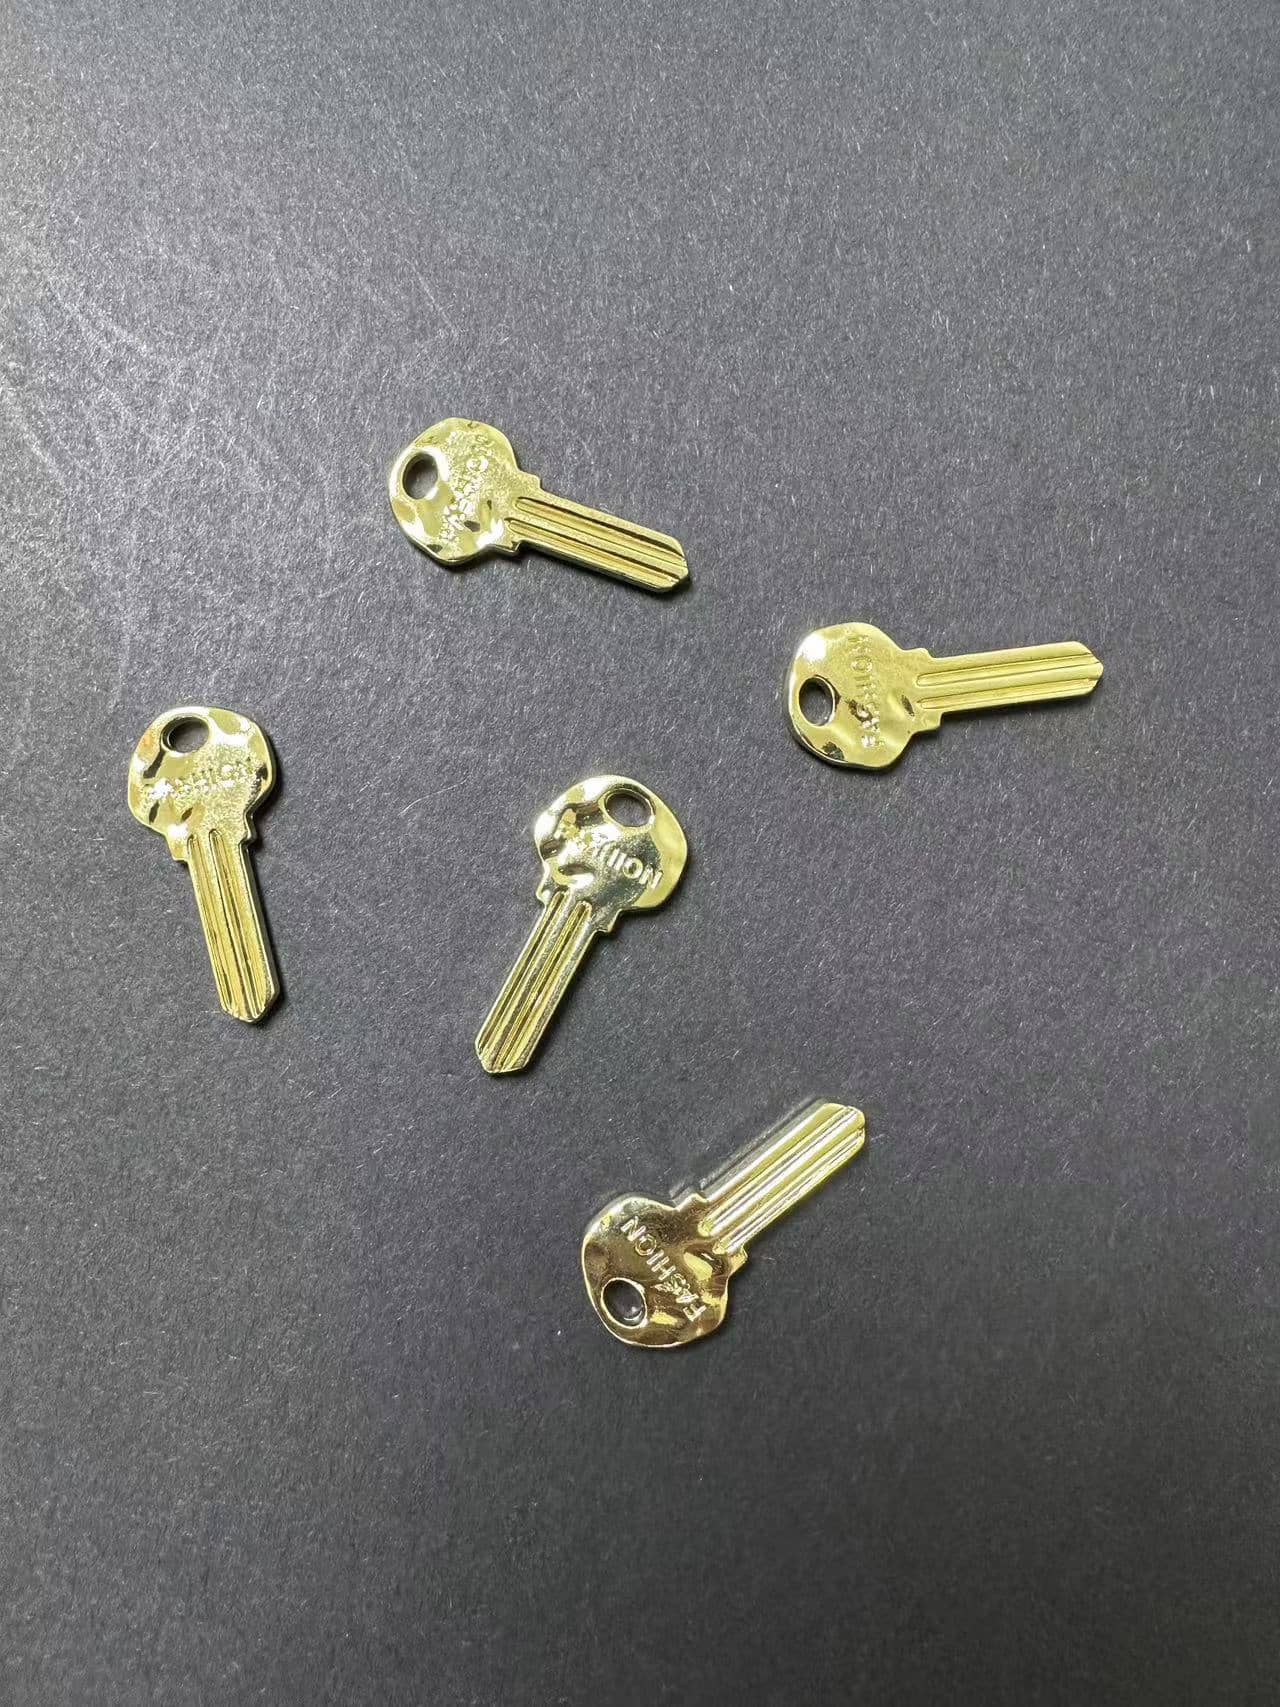 y2k golden key (Not for sale, only for display)